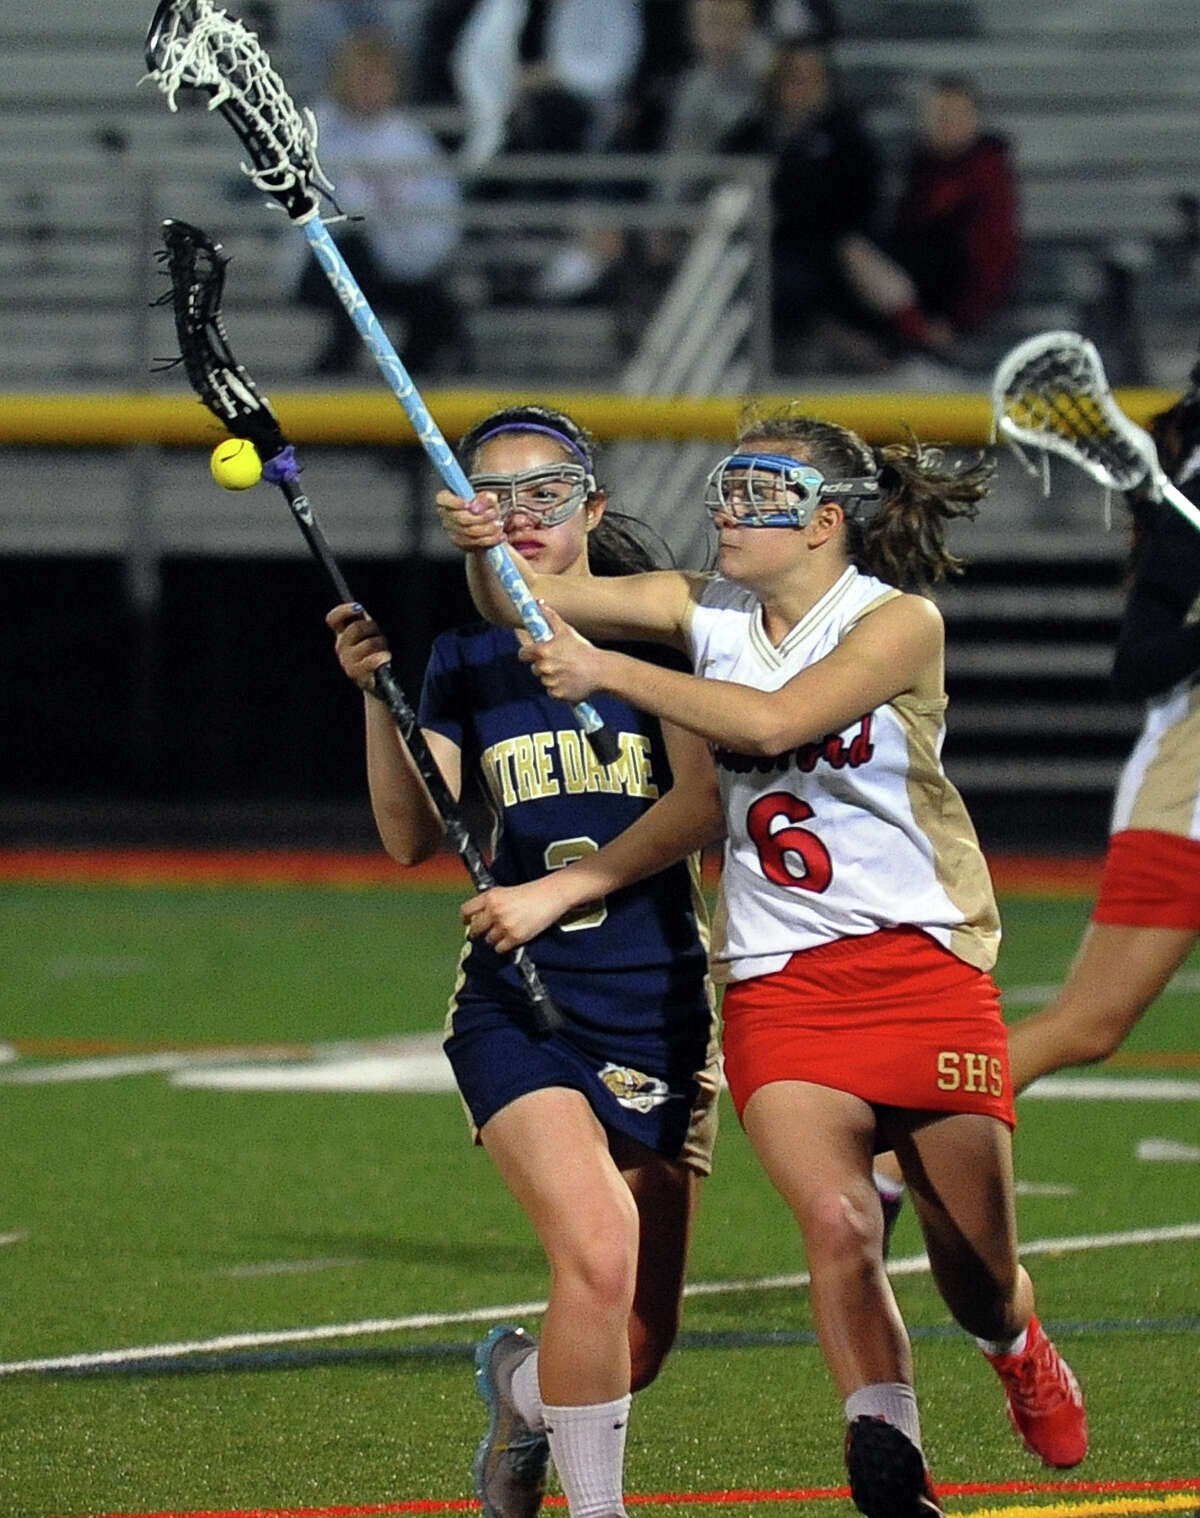 Stratford's Quincy Cayton, right, disrupts a drive by Notre Dame of Fairfield's Brianna Foster, during girls lacrosse action in Stratford, Conn. on Tuesday April 16, 2013.